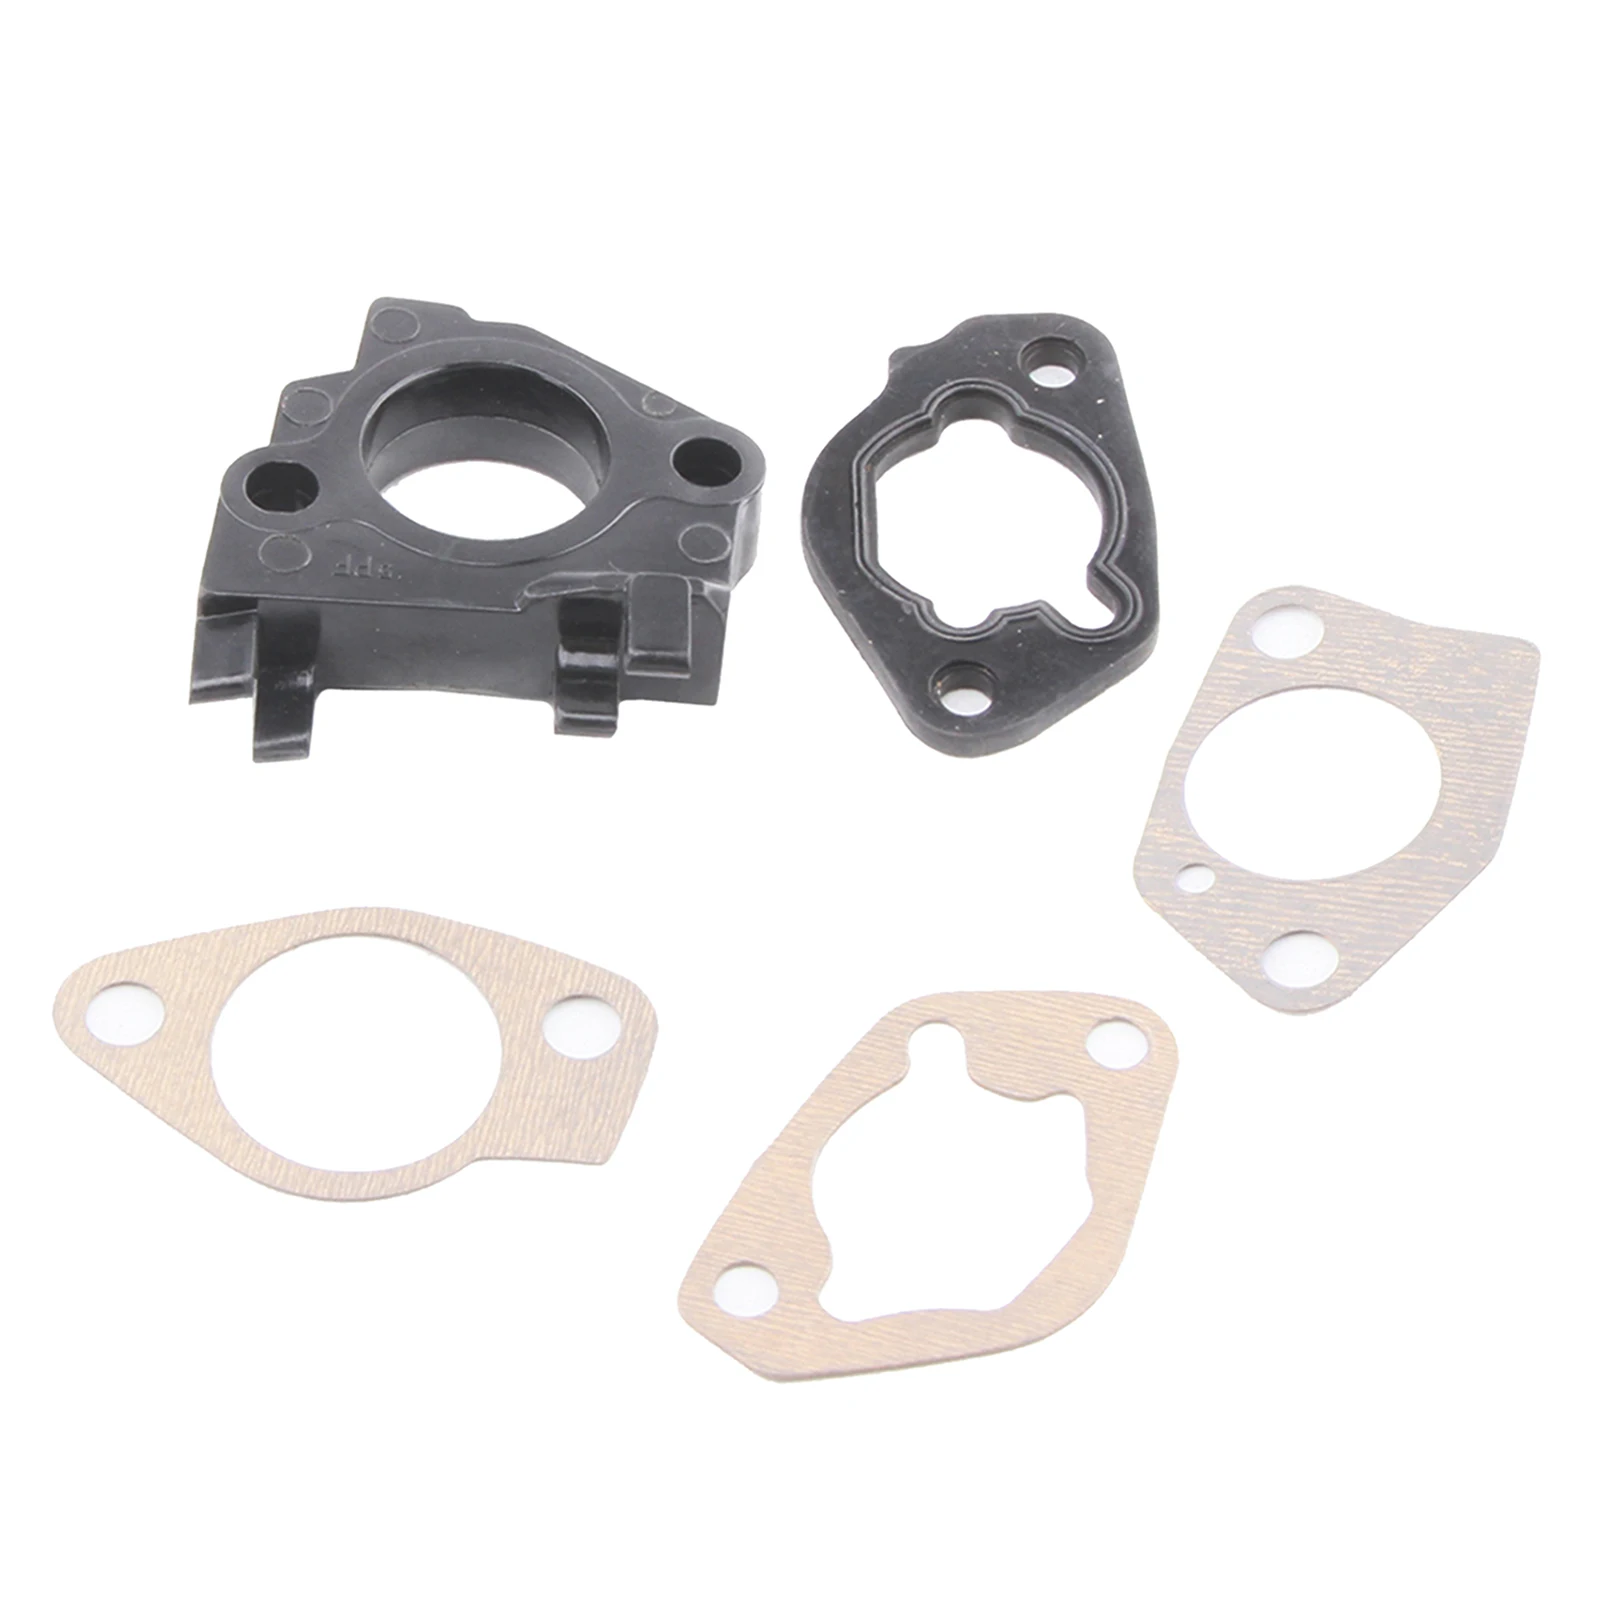 CARBURETOR 5 GASKETS SET for HONDA 13HP GX340 11HP - Made of high quality material, reliable quality and durable